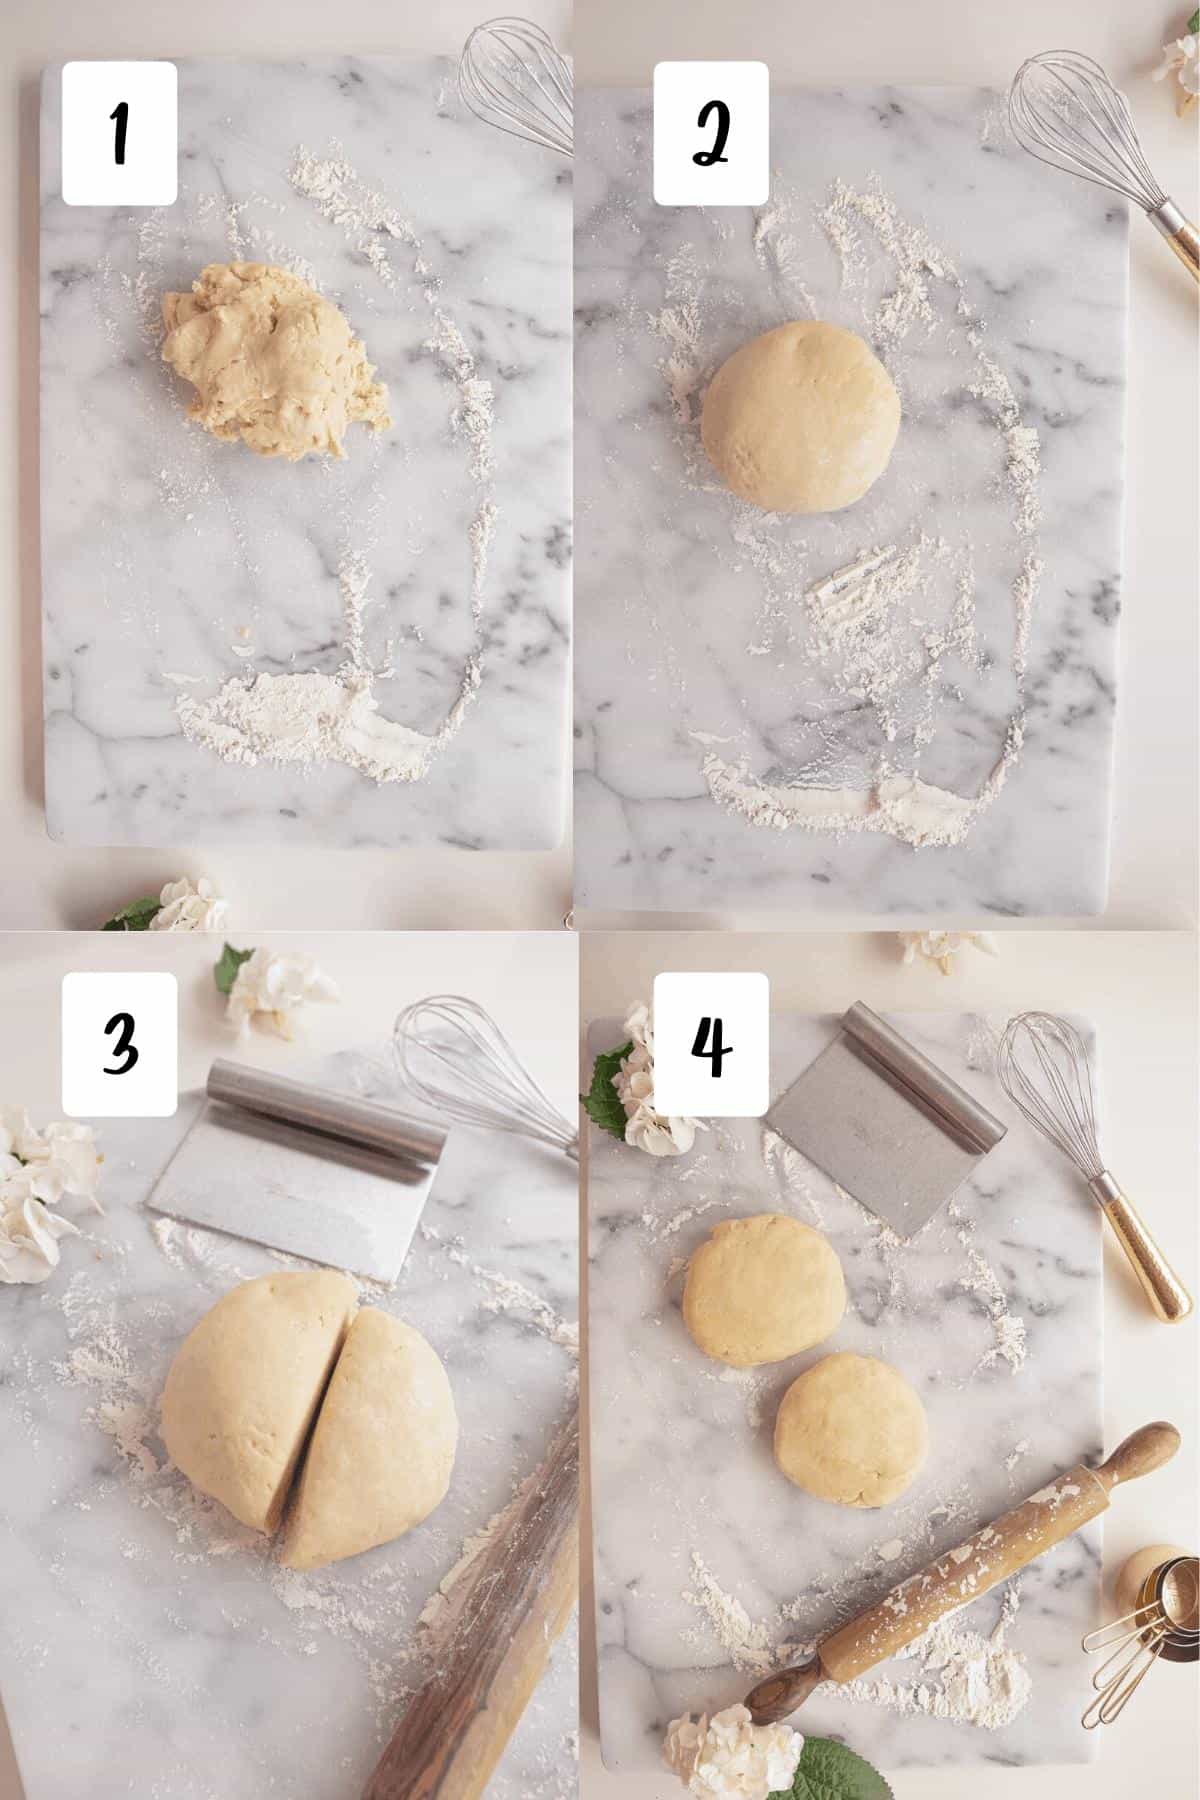 process for balling pie dough and cutting in half